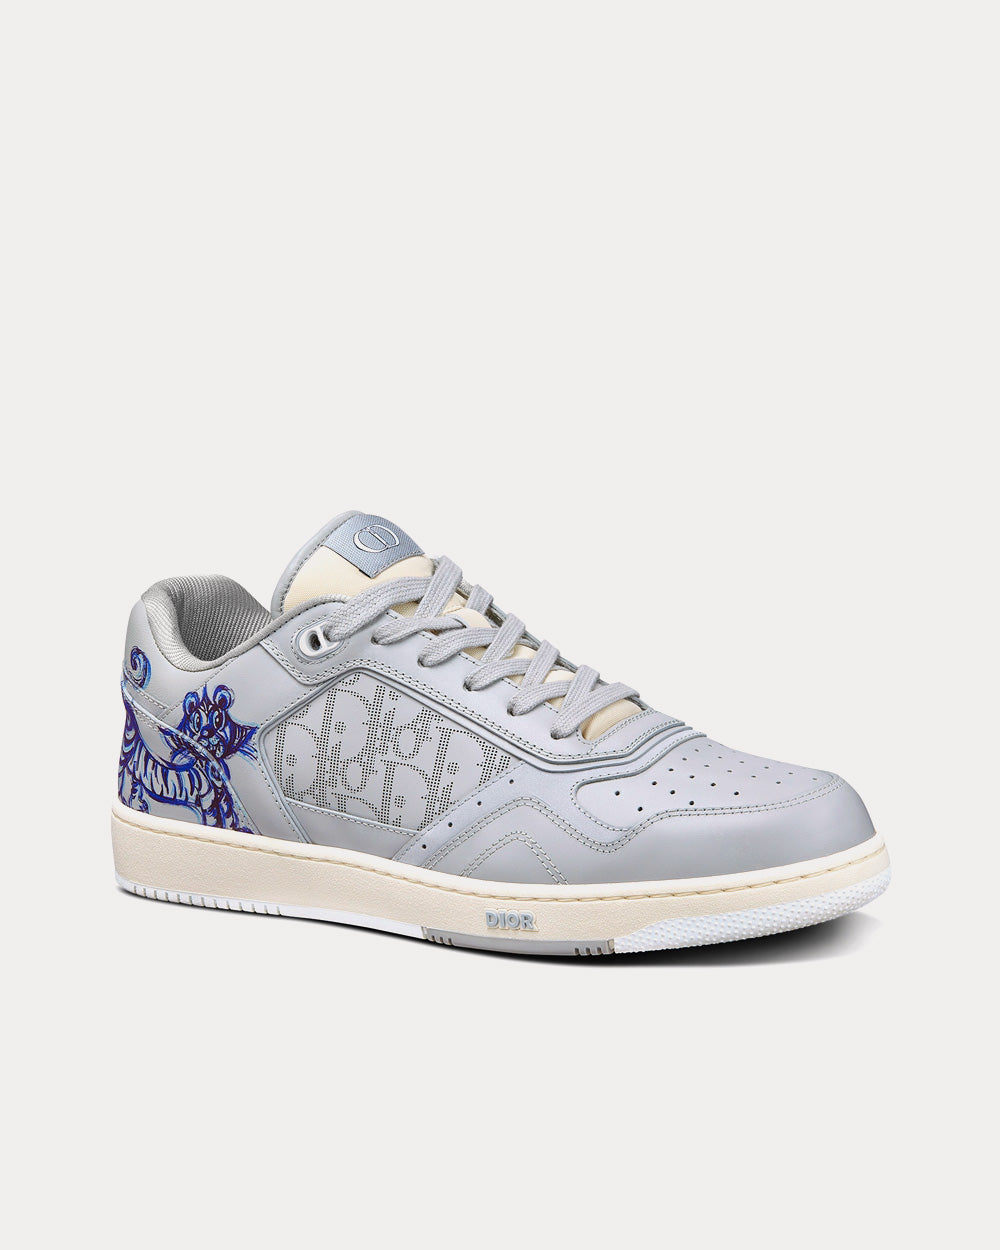 Dior x Kenny Scharf - B27 Smooth Calfskin with Gray Dior Oblique Galaxy Leather and Blue Tiger Print Low Top Sneakers